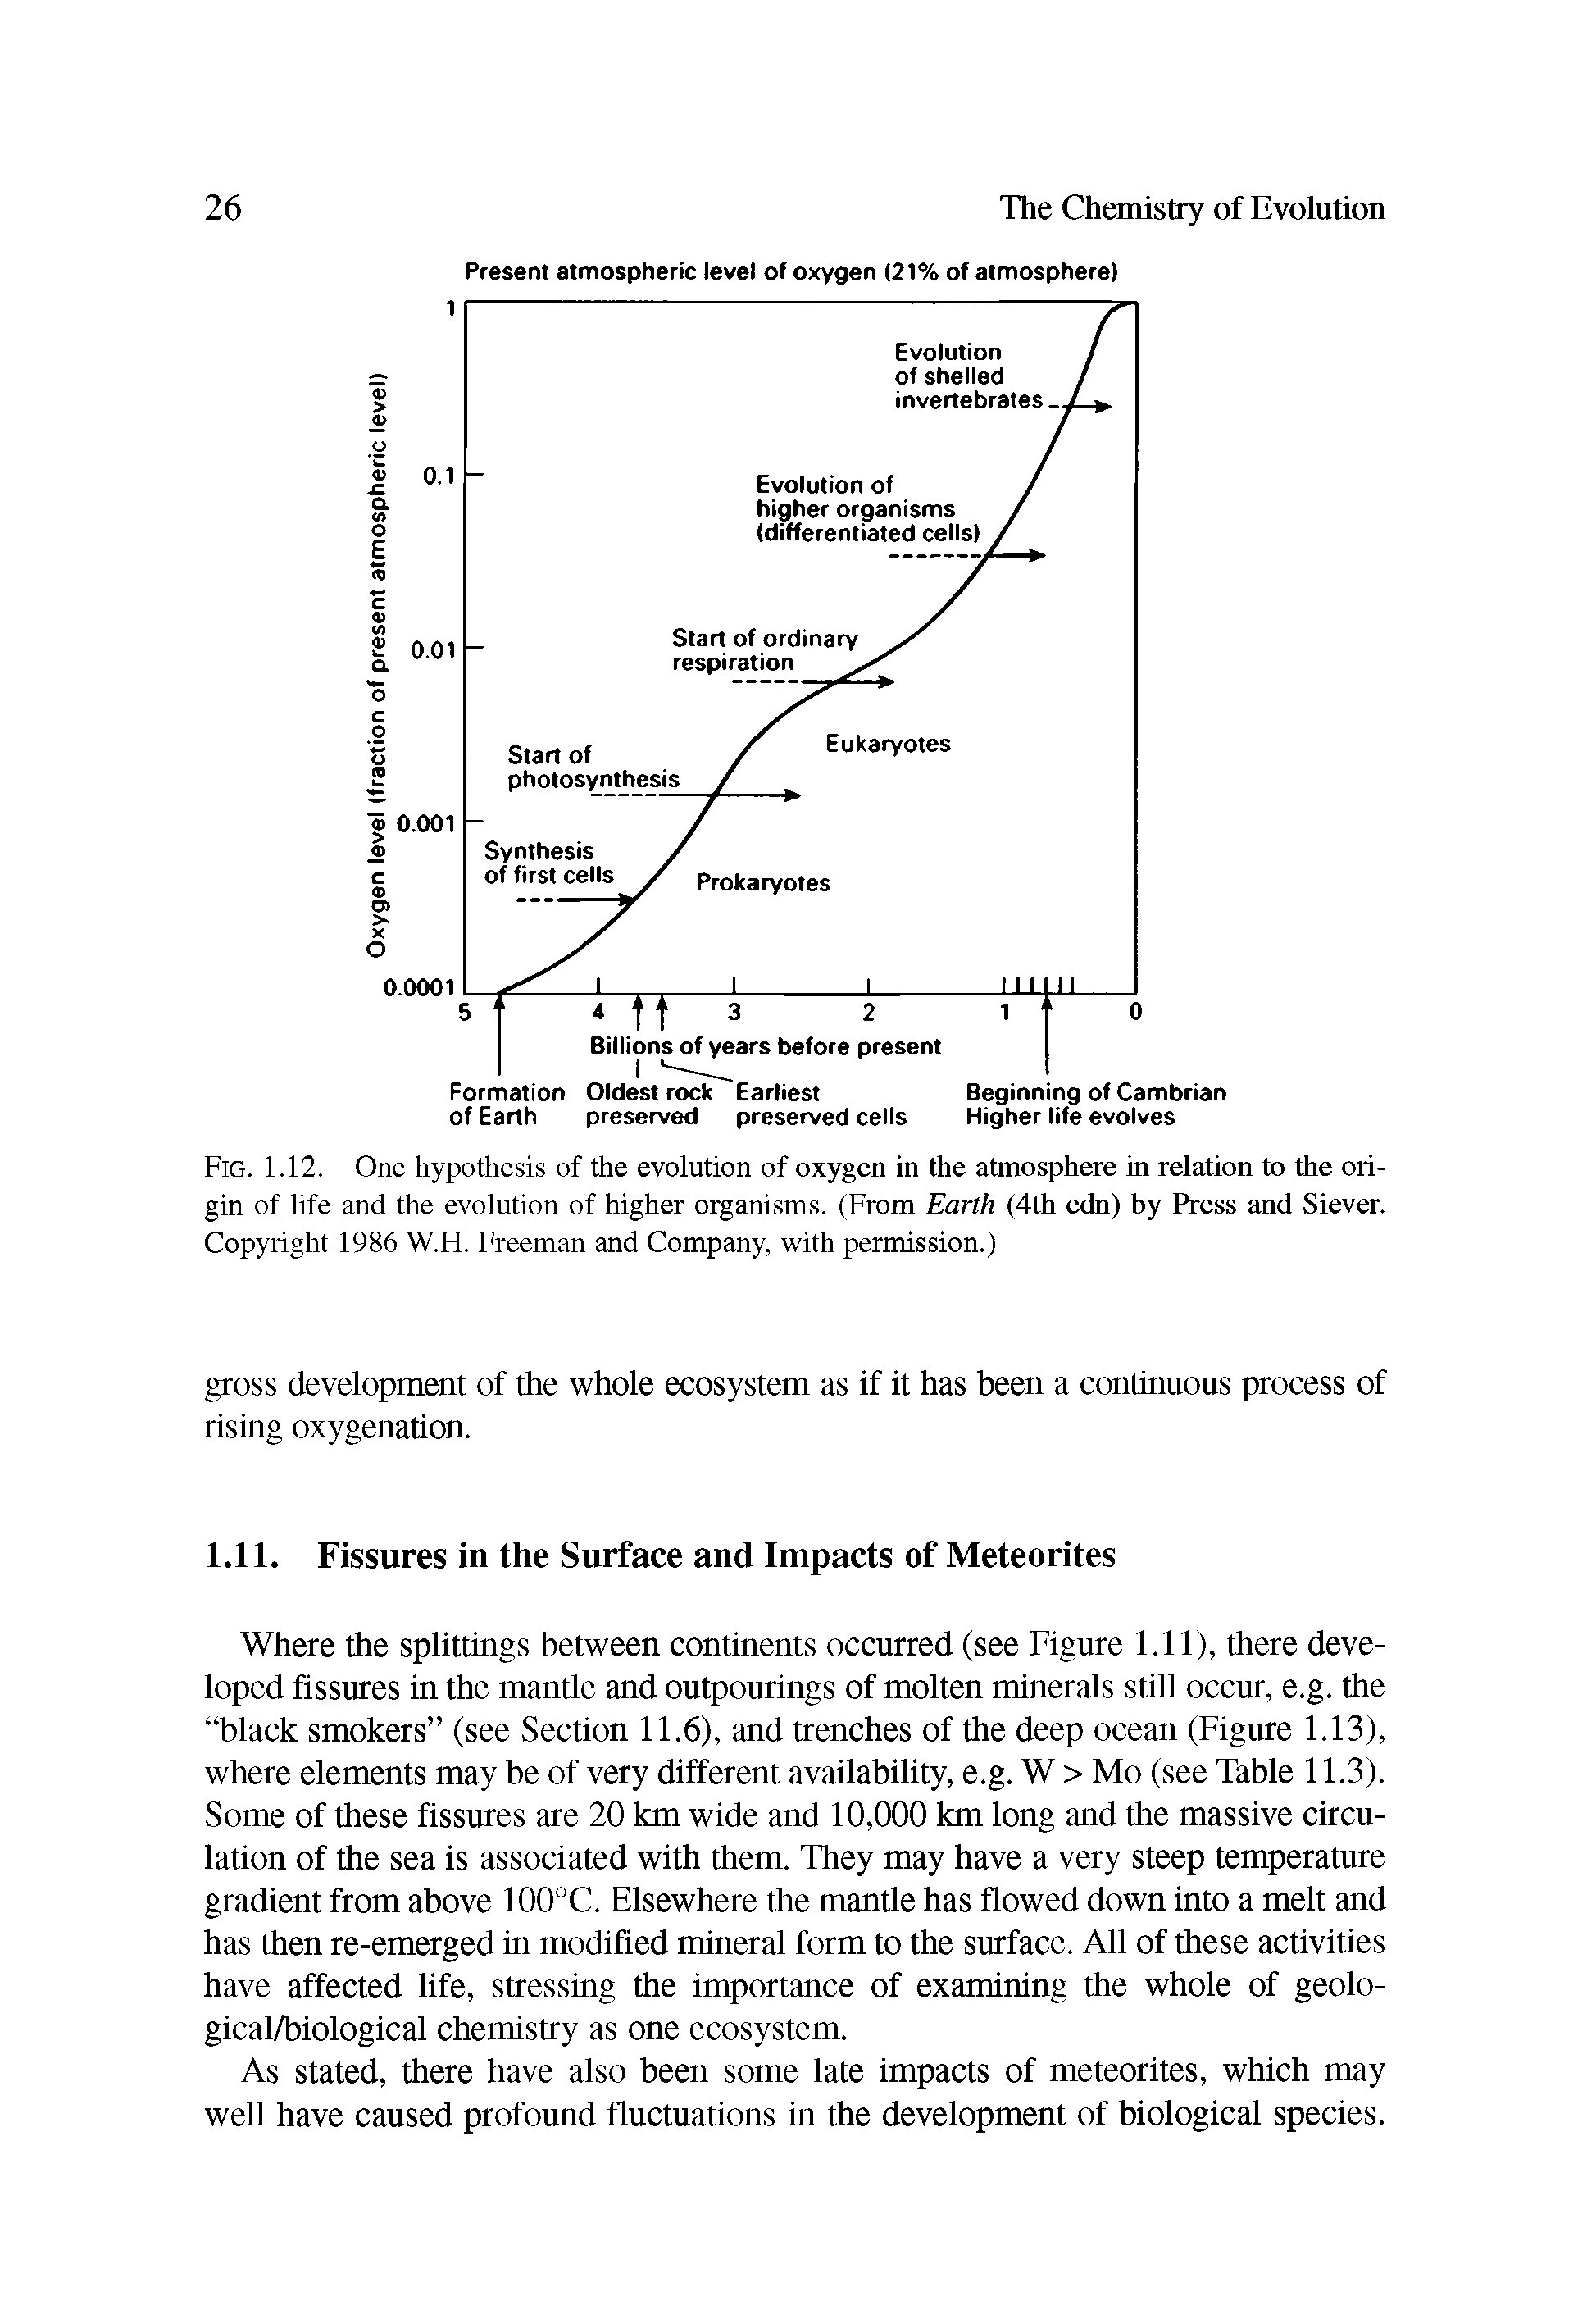 Fig. 1.12. One hypothesis of the evolution of oxygen in the atmosphere in relation to the origin of life and the evolution of higher organisms. (From Earth (4th edn) by Press and Siever. Copyright 1986 W.H. Freeman and Company, with permission.)...